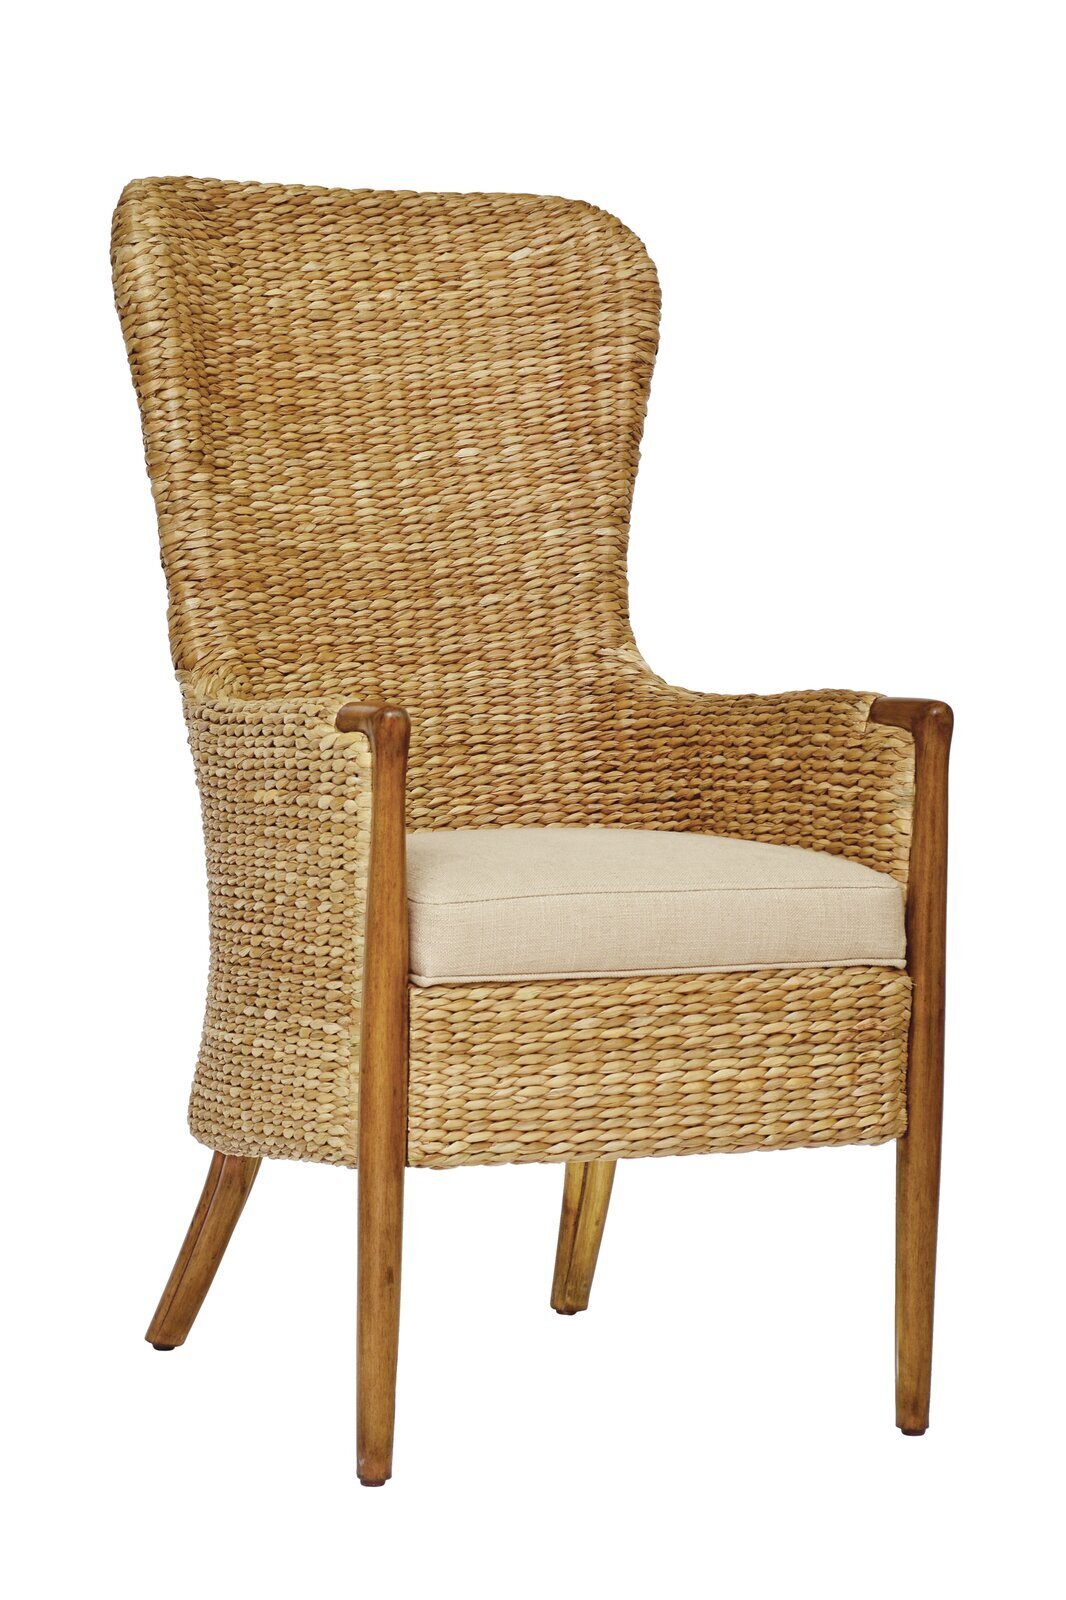 Tall Back Seagrass Dining Chair